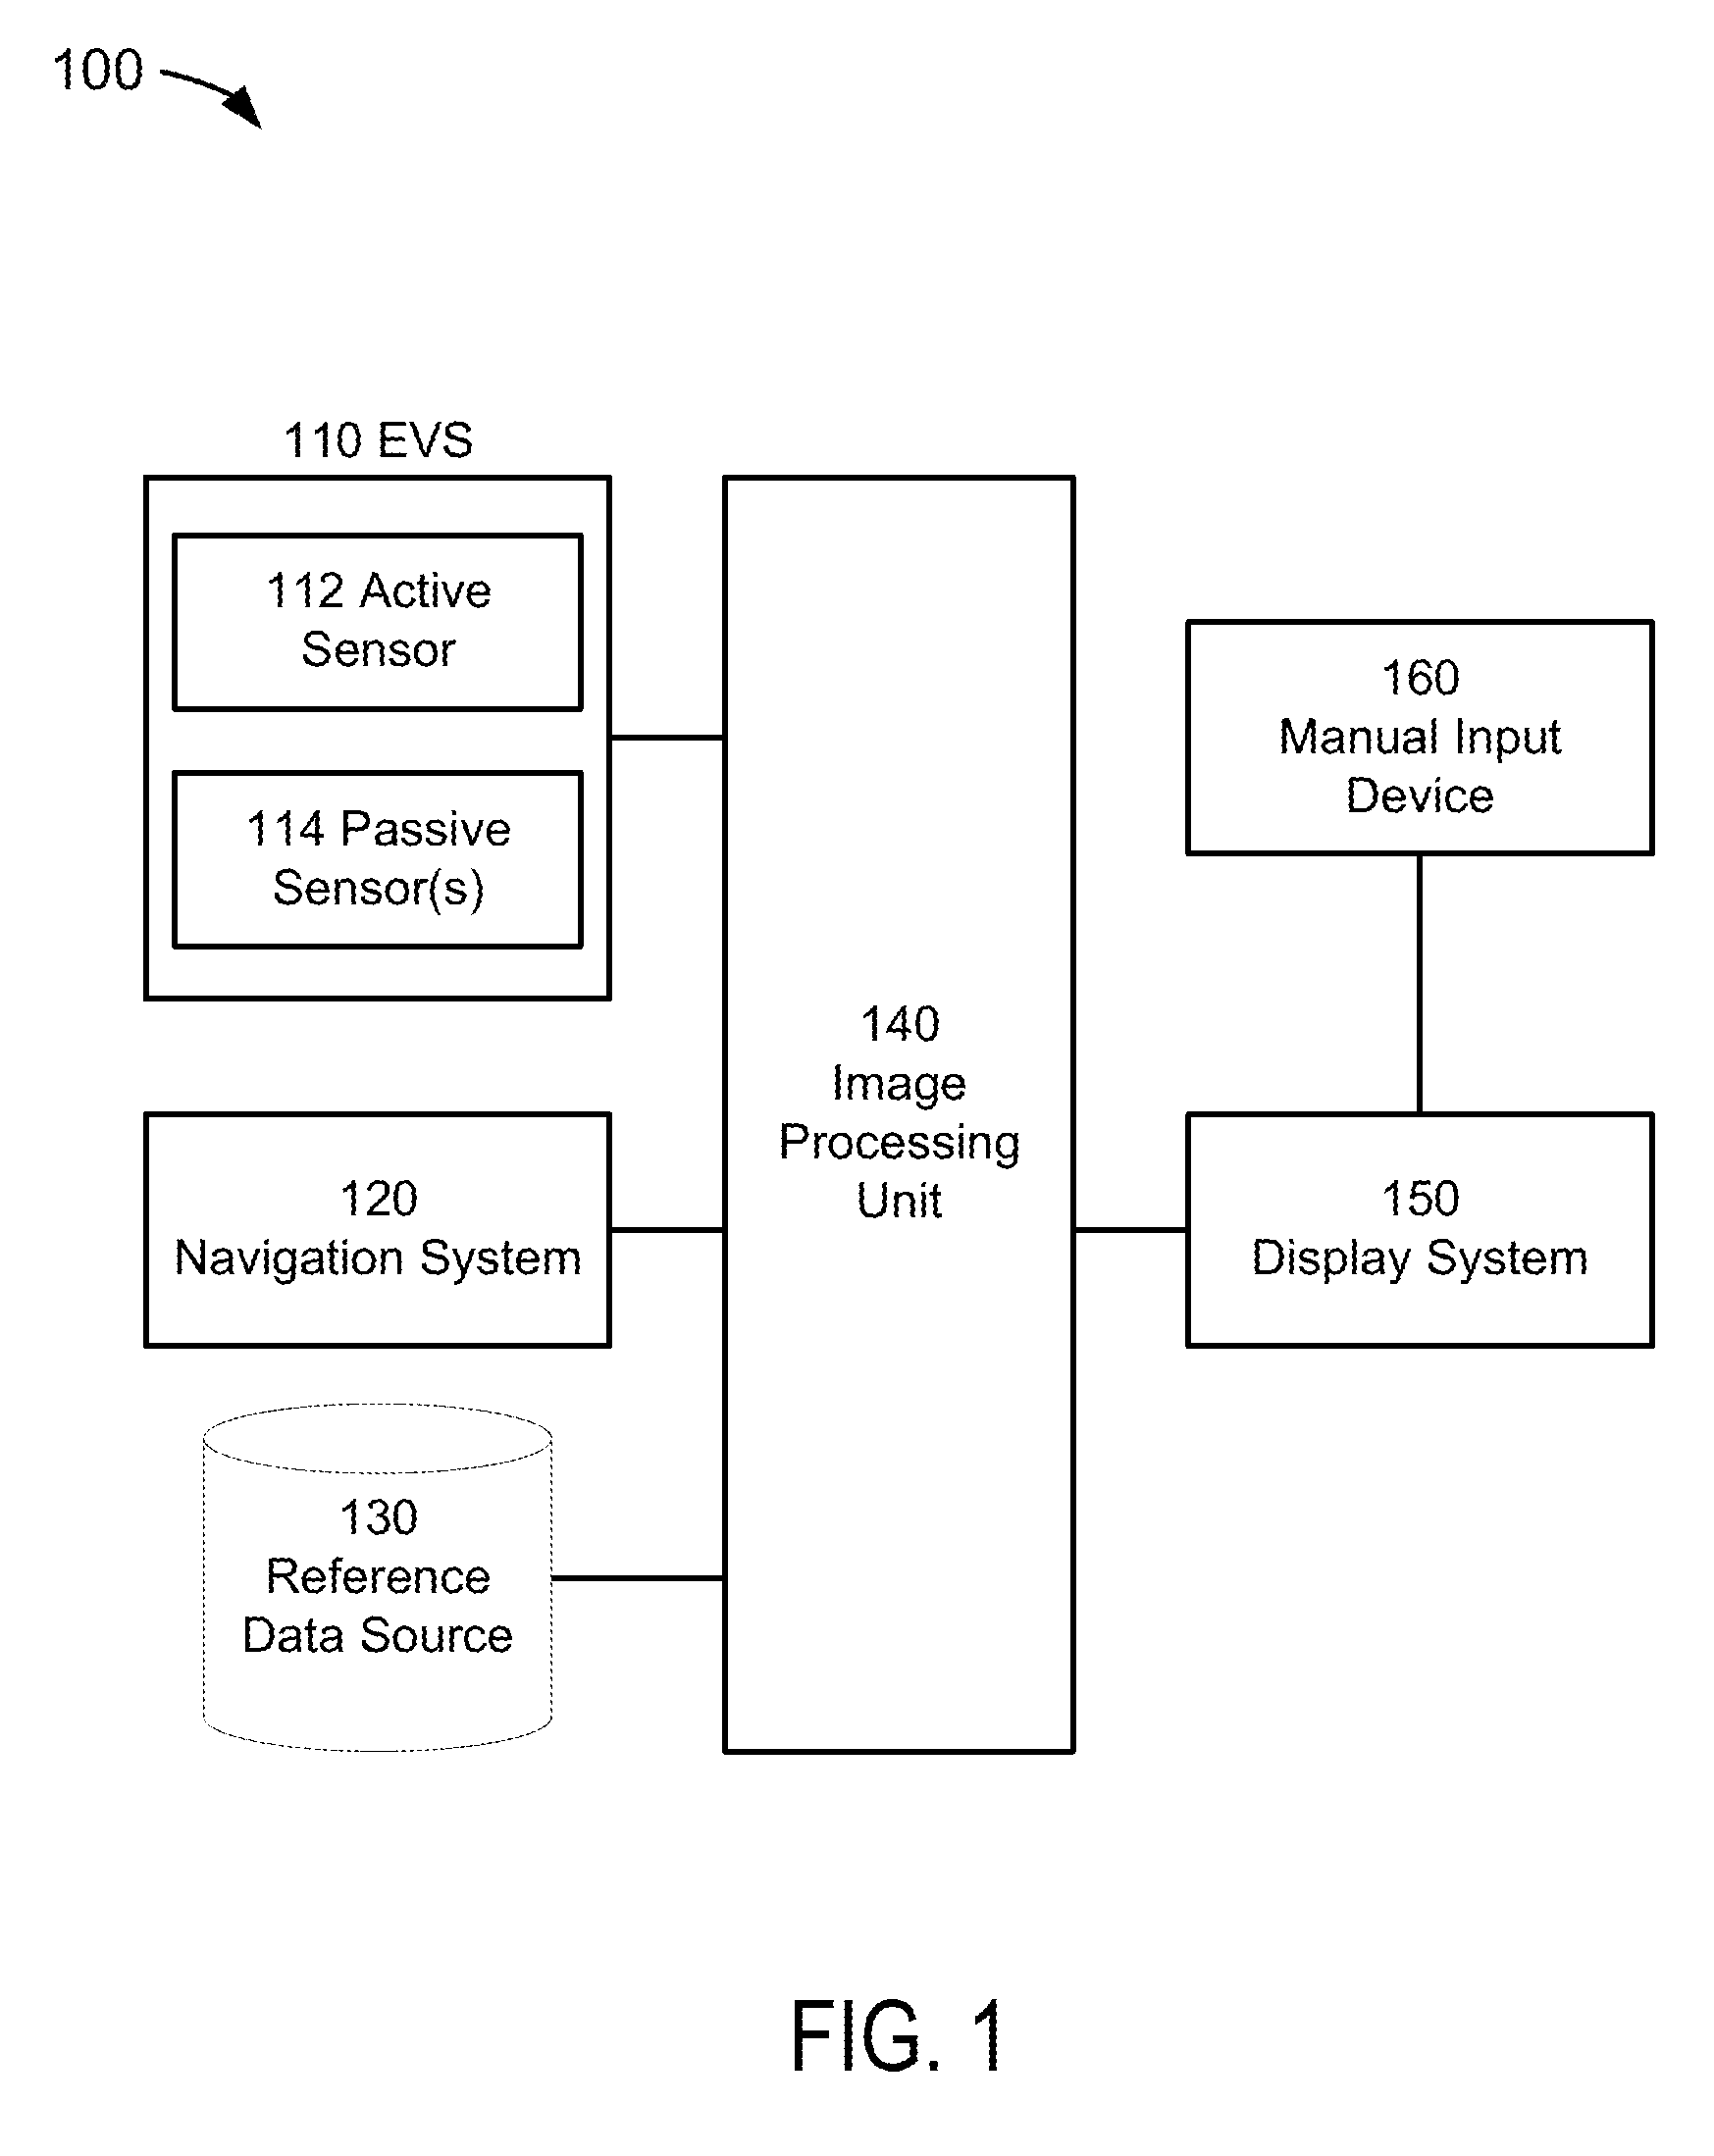 Sensor-based image(s) integrity determination system, device, and method